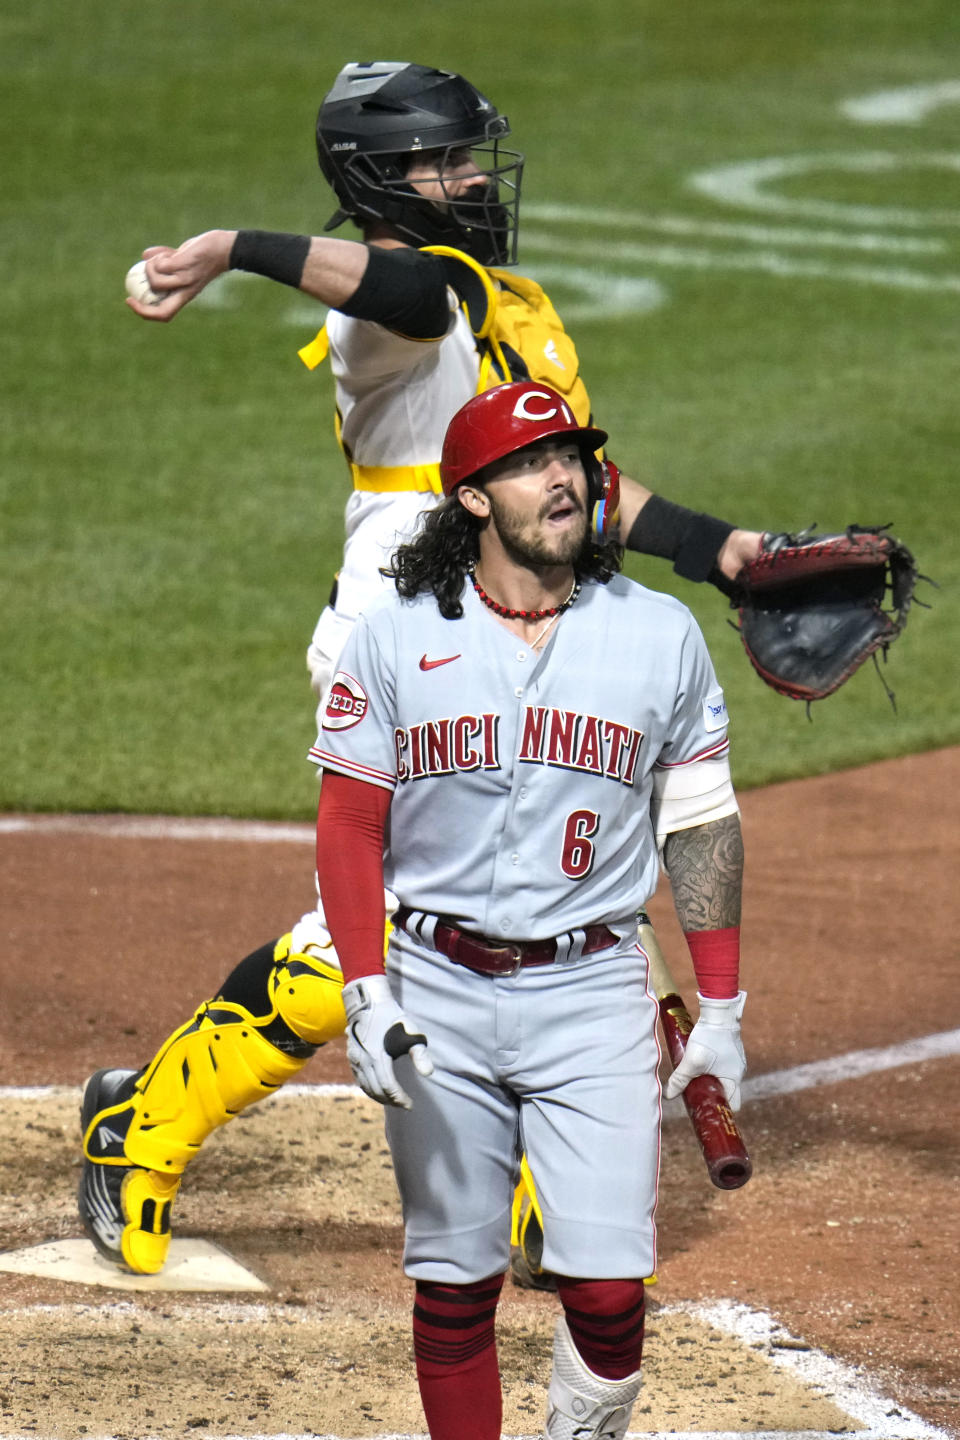 Cincinnati Reds' Jonathan India (6) walks back to the dugout after striking out during the ninth inning of a baseball game against the Pittsburgh Pirates in Pittsburgh, Saturday, April 22, 2023. The Pirates won 2-1. (AP Photo/Gene J. Puskar)